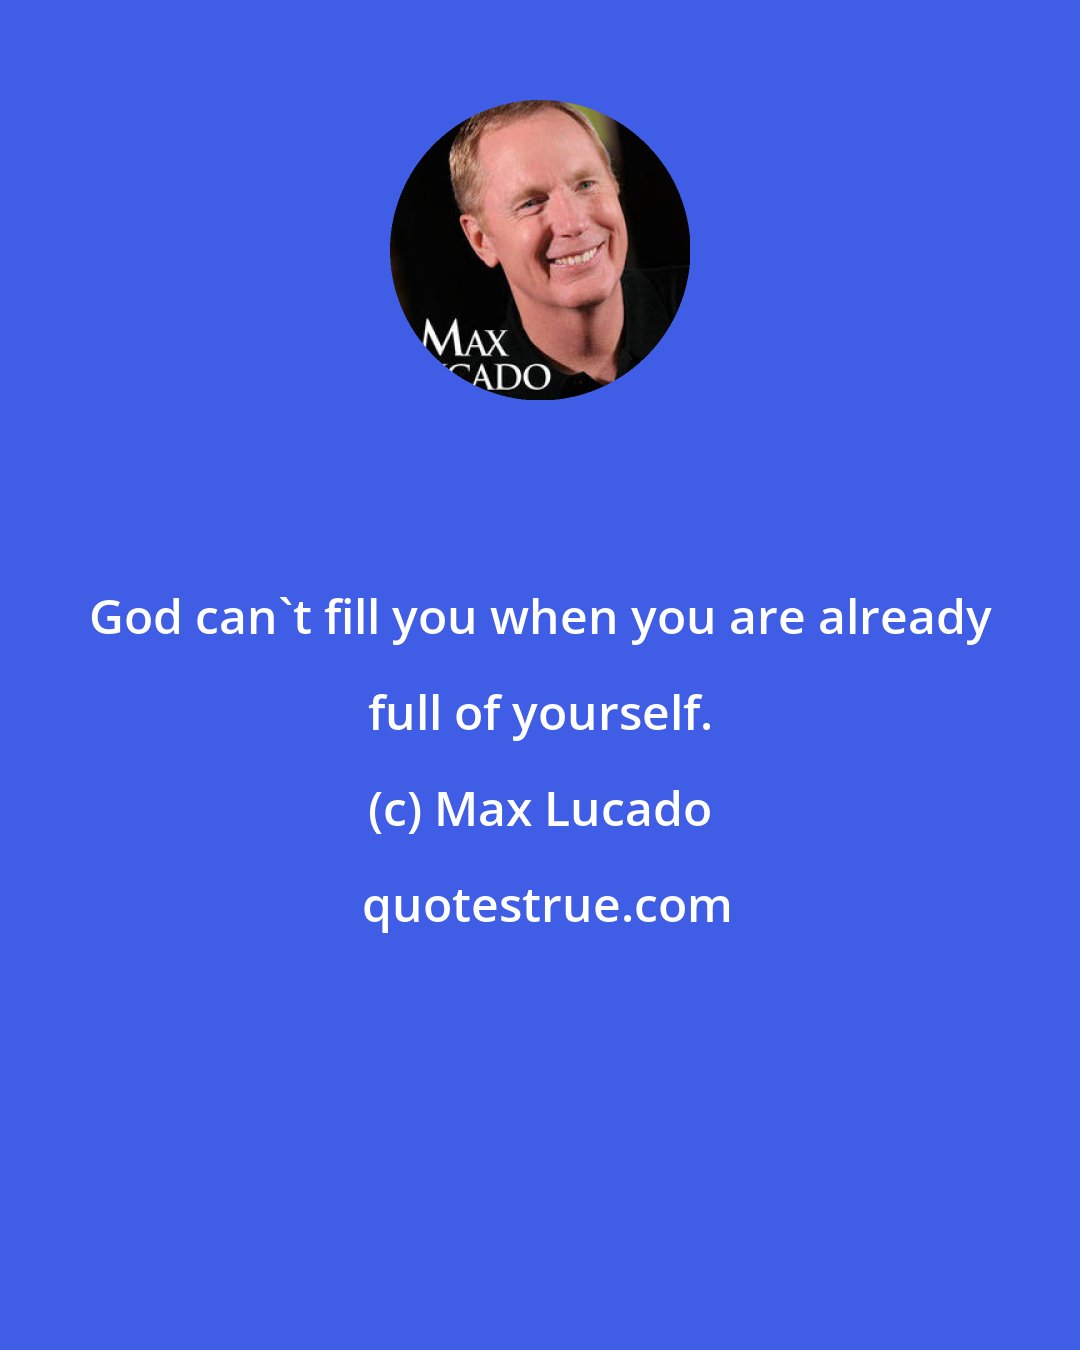 Max Lucado: God can't fill you when you are already full of yourself.